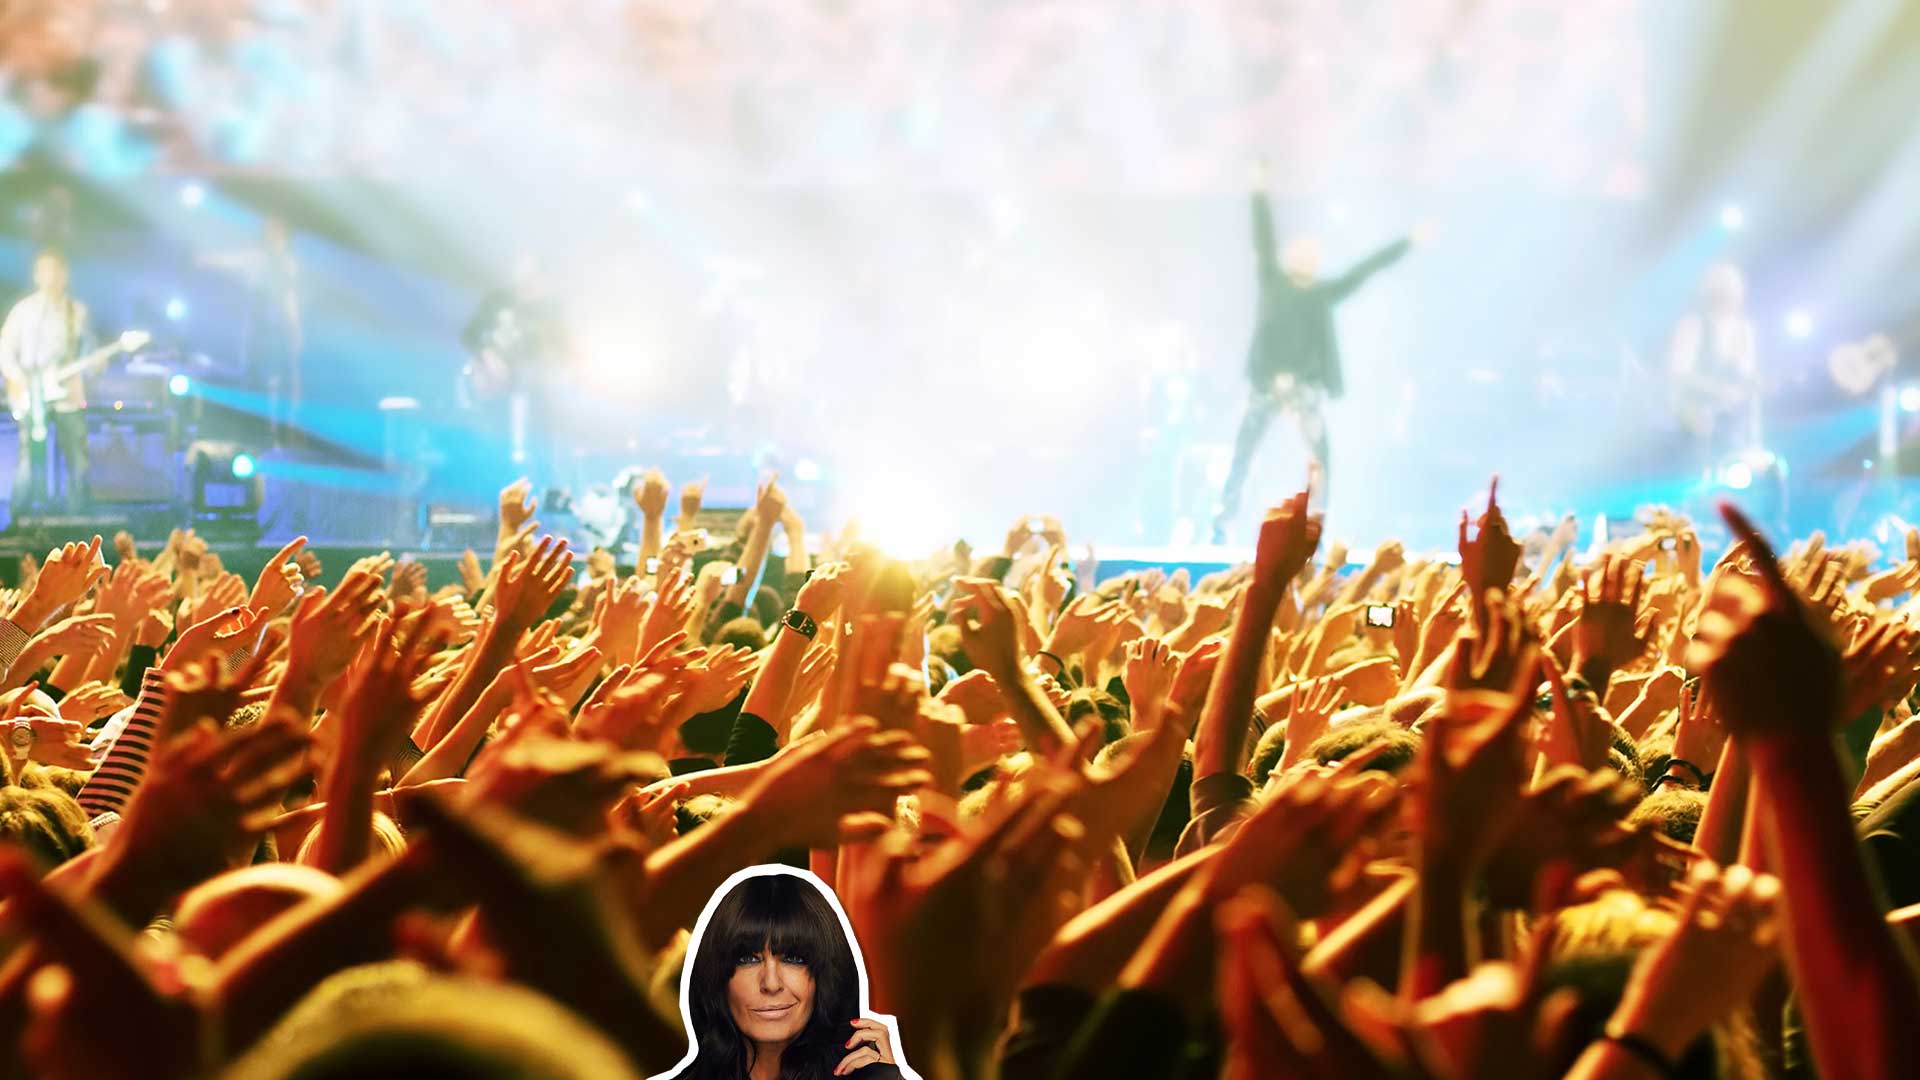 Claudia Winkleman in a large crowd watching a band play